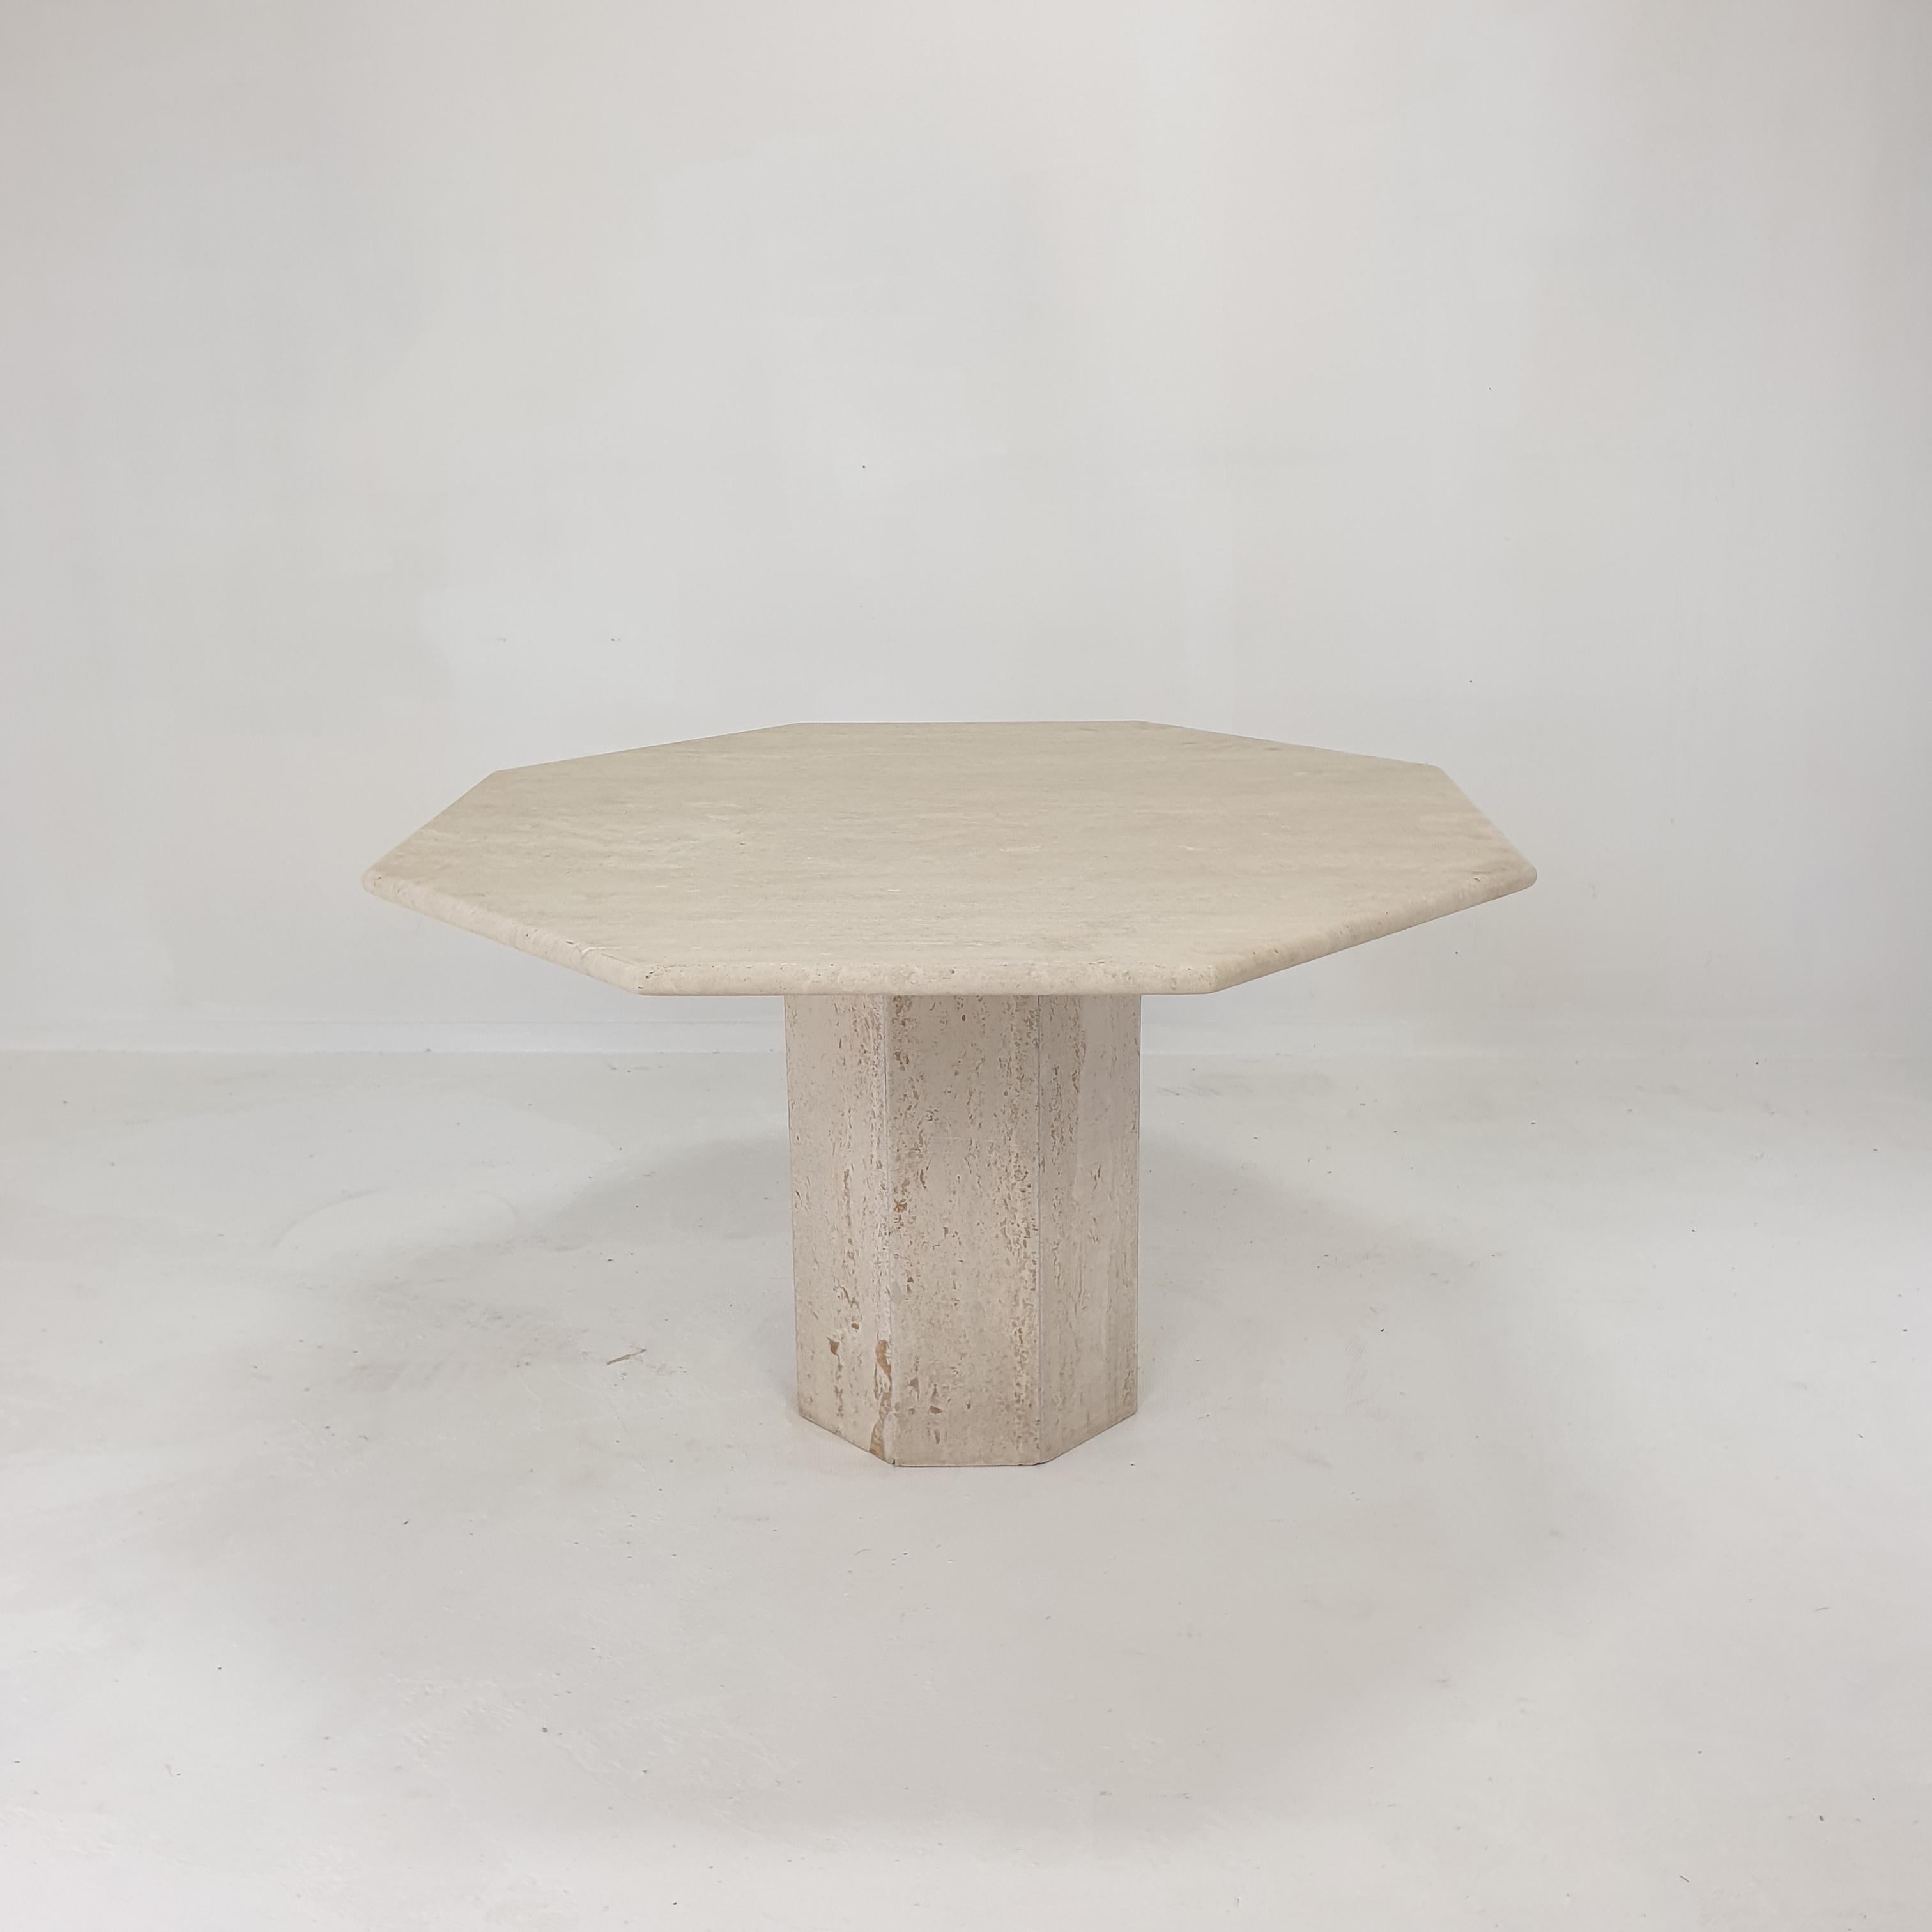 Italian Travertine Garden or Dining Table, 1970s For Sale 2